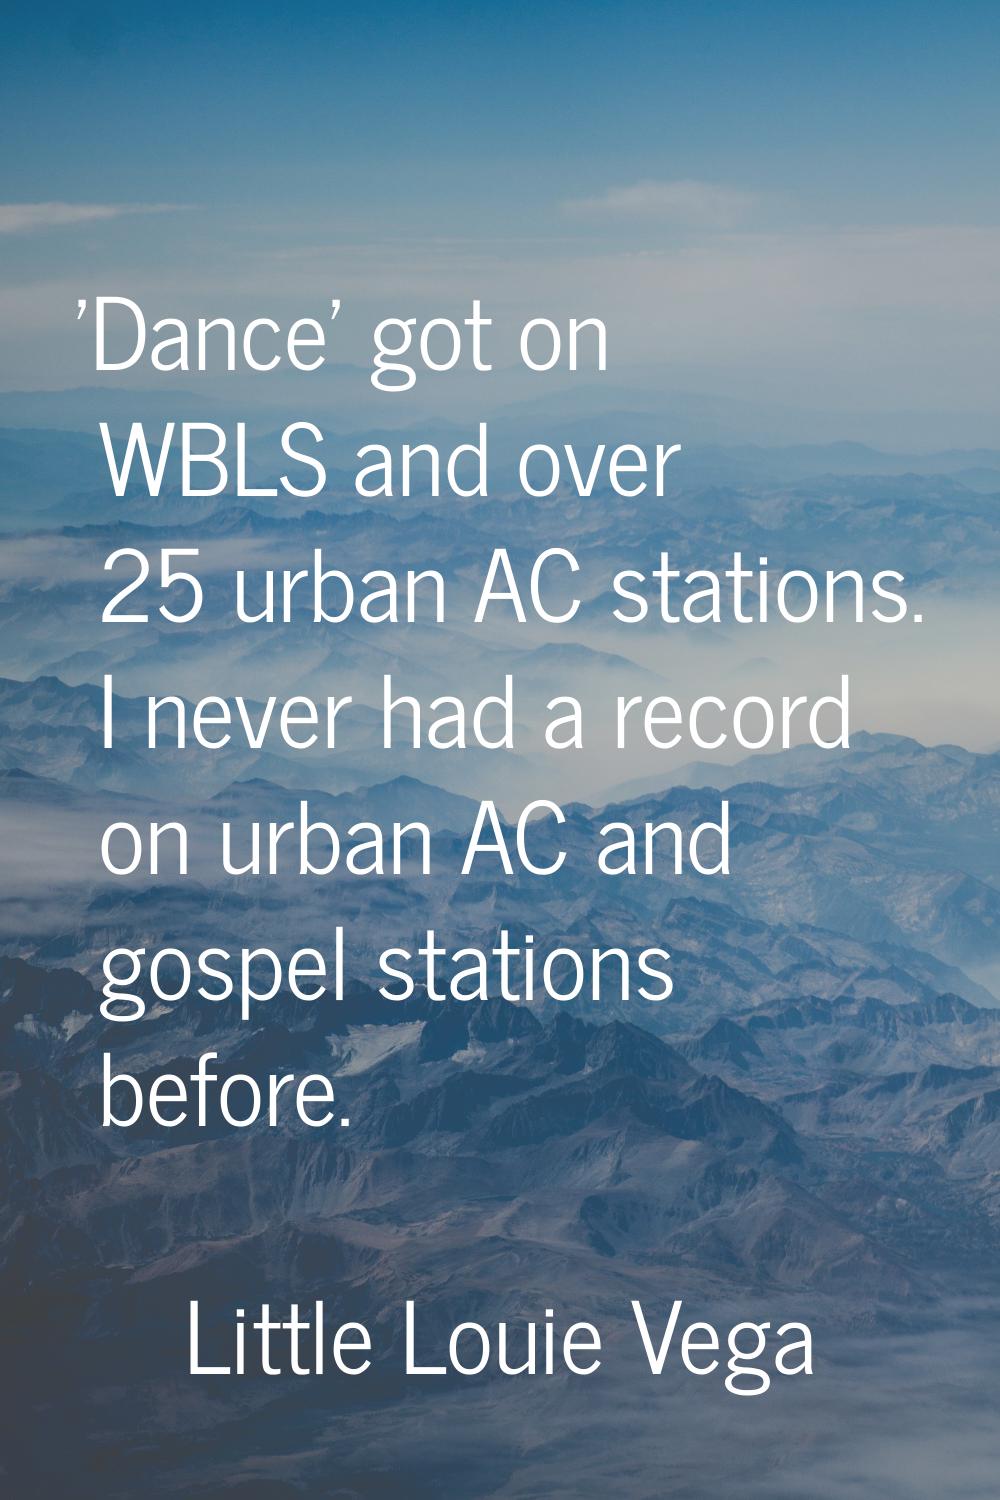 'Dance' got on WBLS and over 25 urban AC stations. I never had a record on urban AC and gospel stat